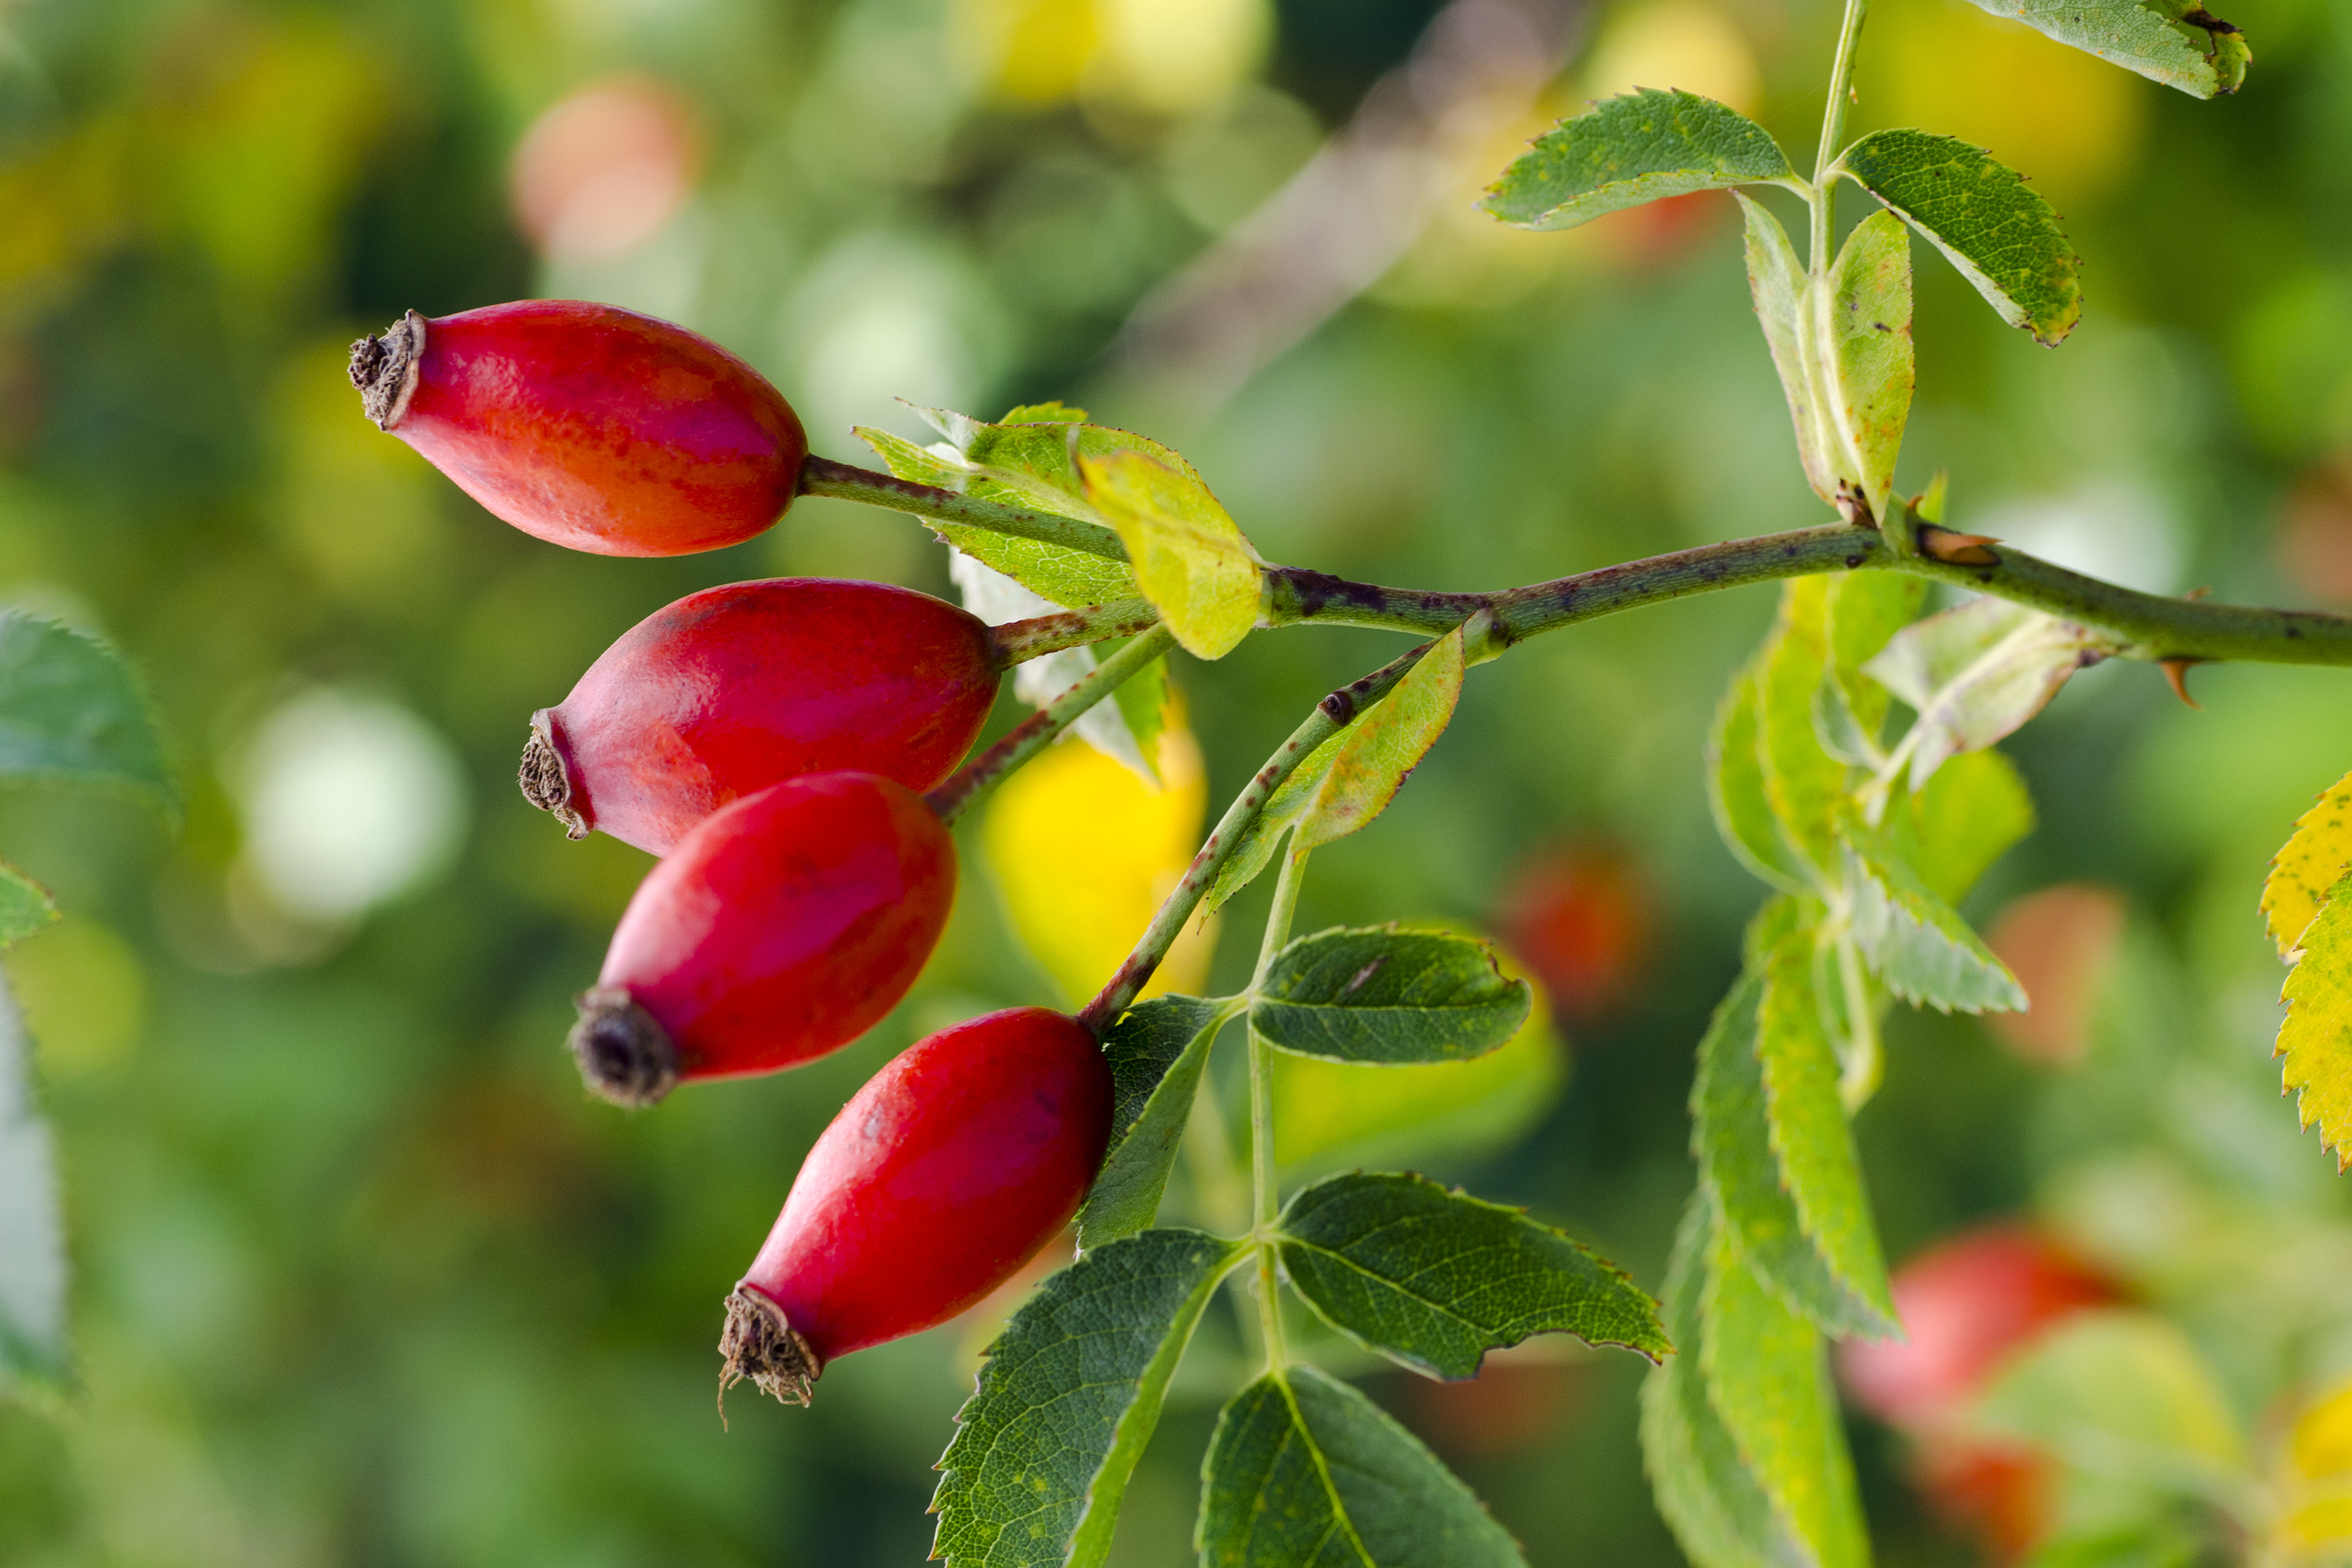 Rose hips add colour during the cooler months (Thinkstock/PA)